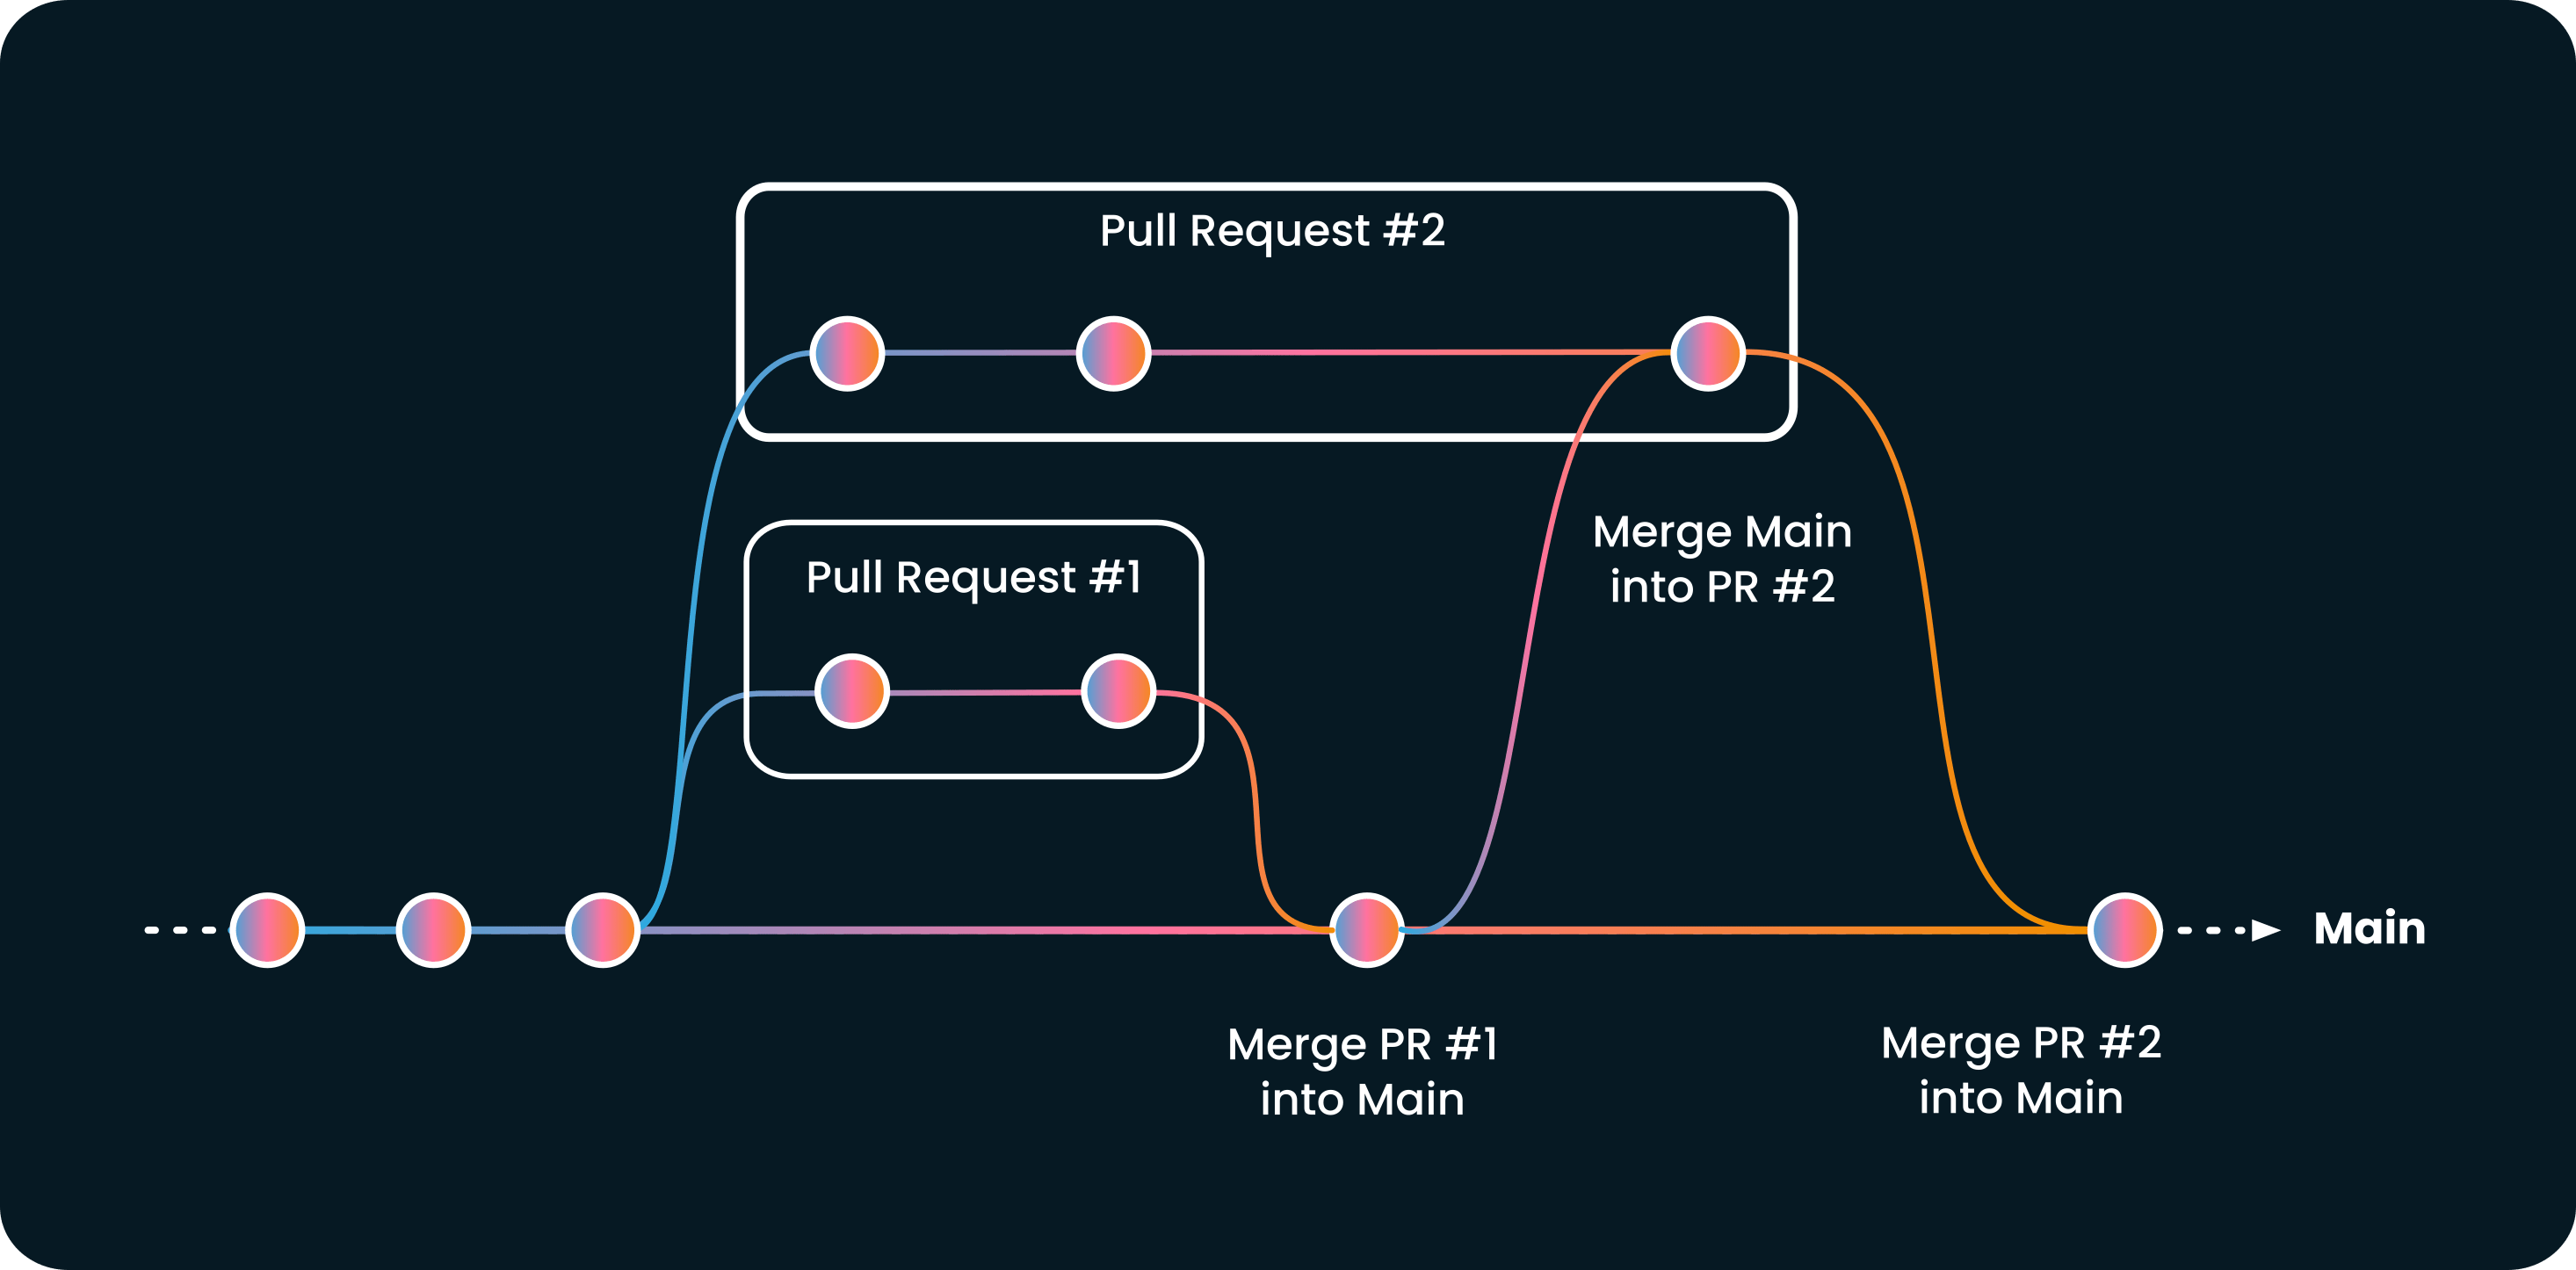 Continuous Merge and Continuous Delivery - Level Up Your CI/CD Pipeline